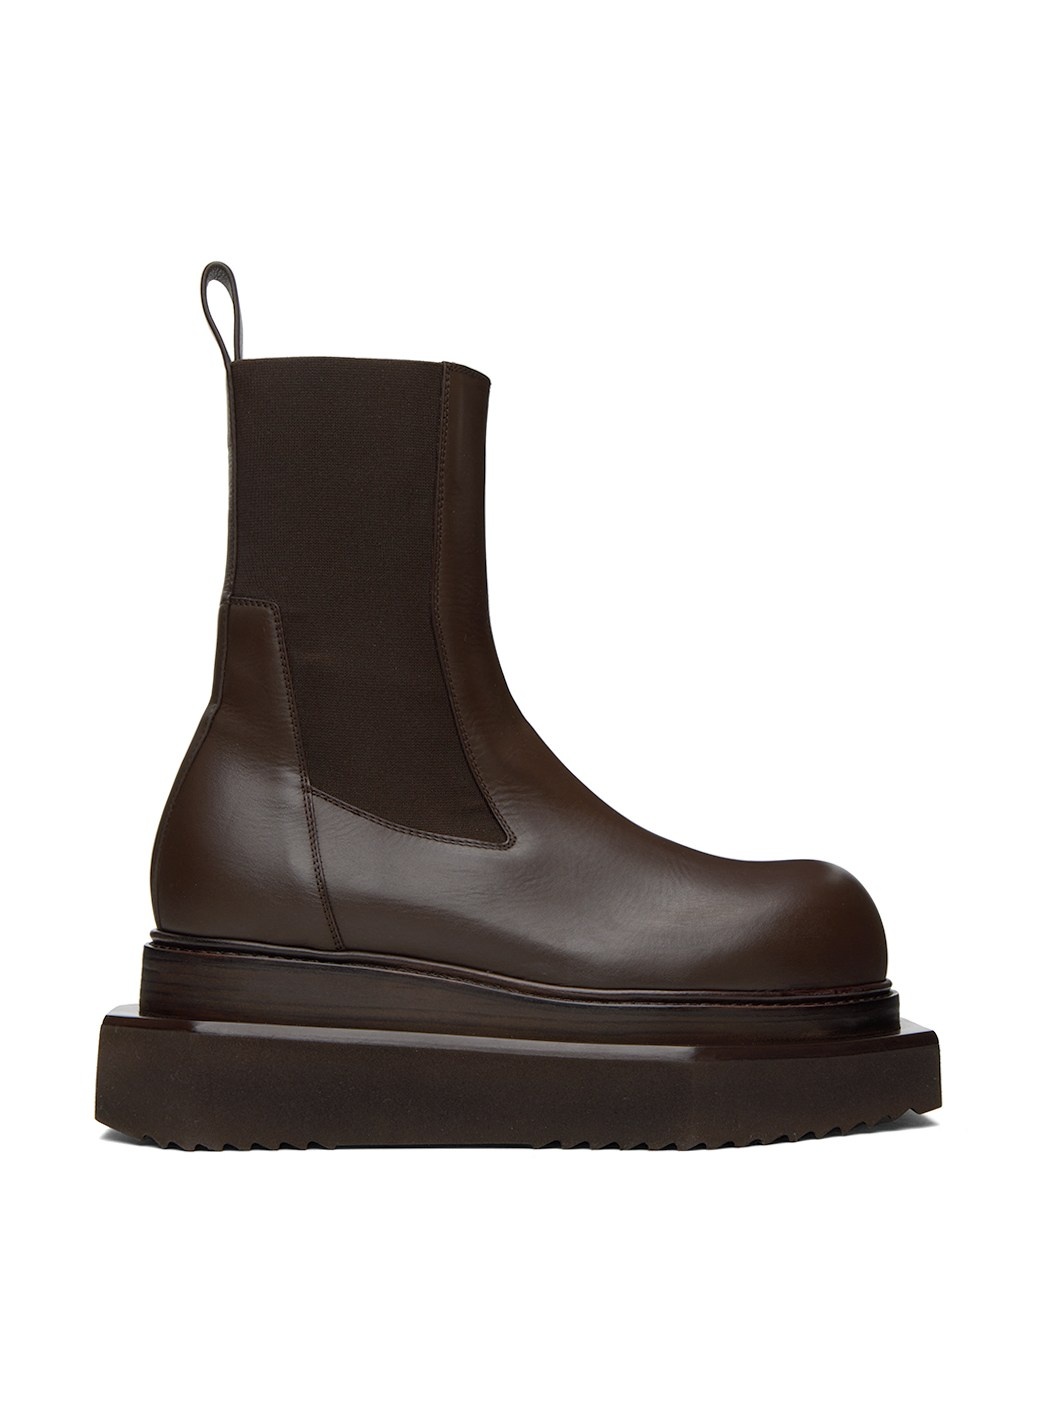 Brown Beatle Turbo Cyclops Boots - 1